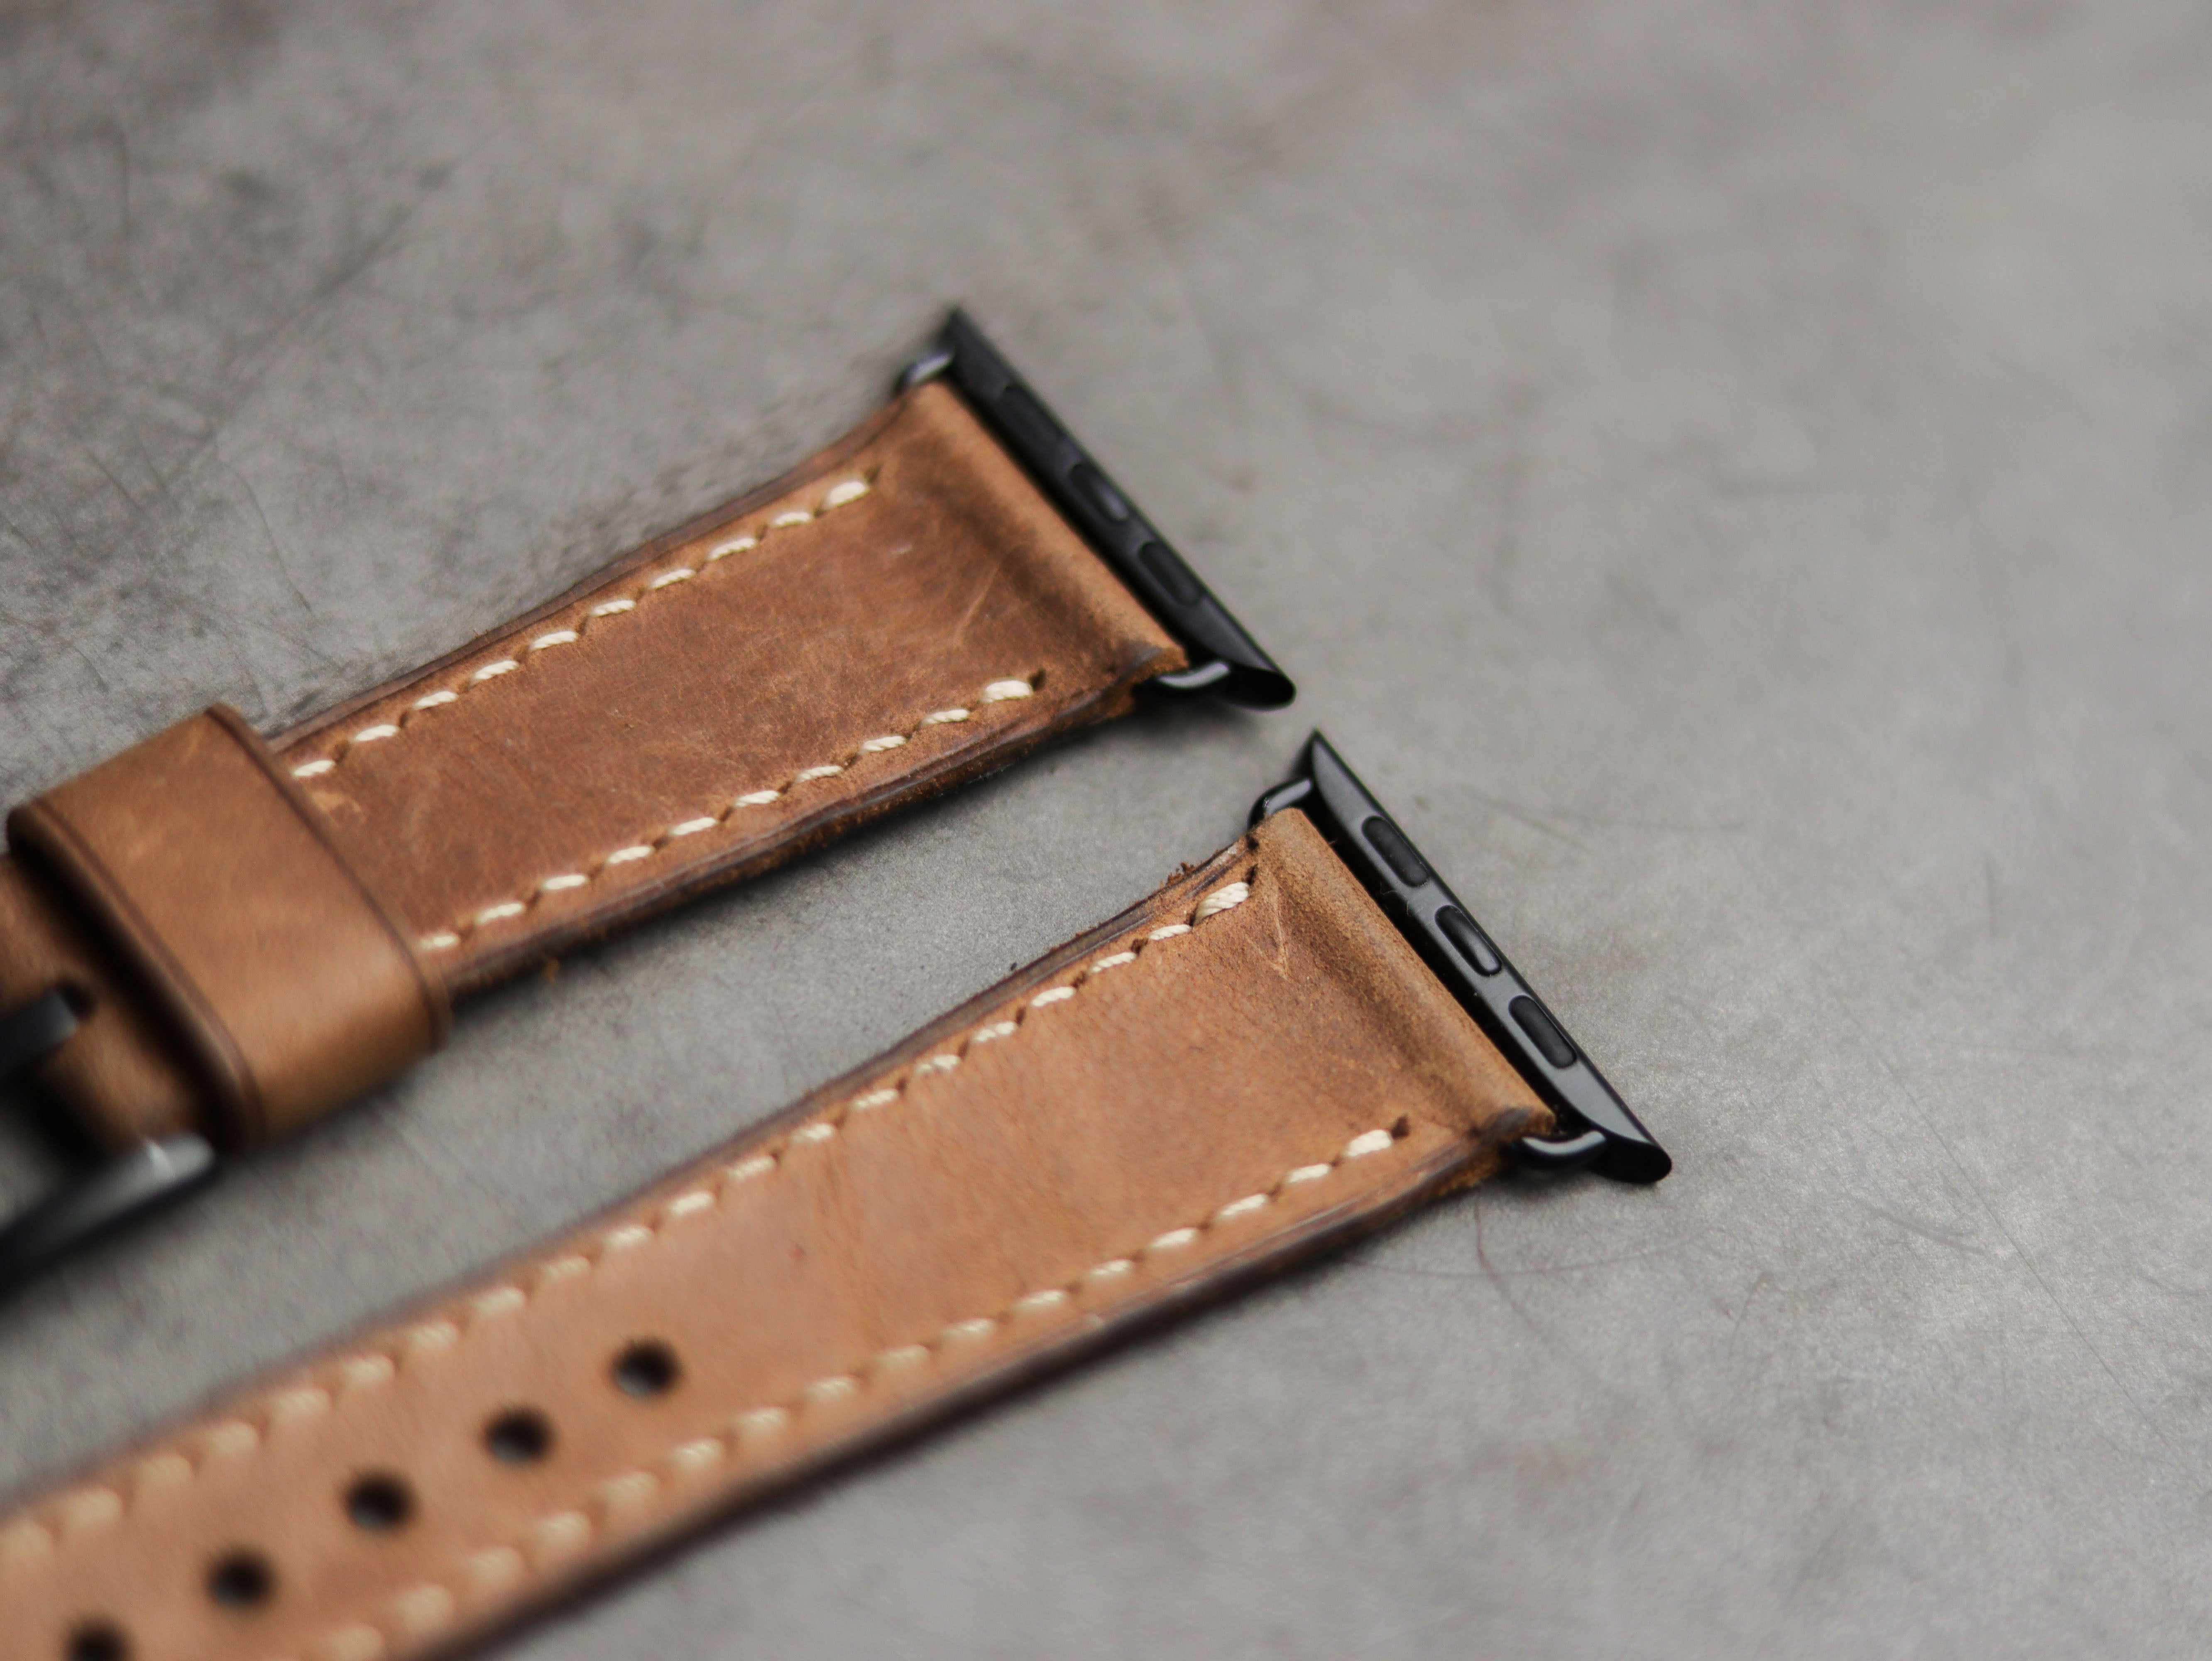 RUSTY BROWN LEATHER - APPLE WATCH STRAPS HAND-CRAFTED